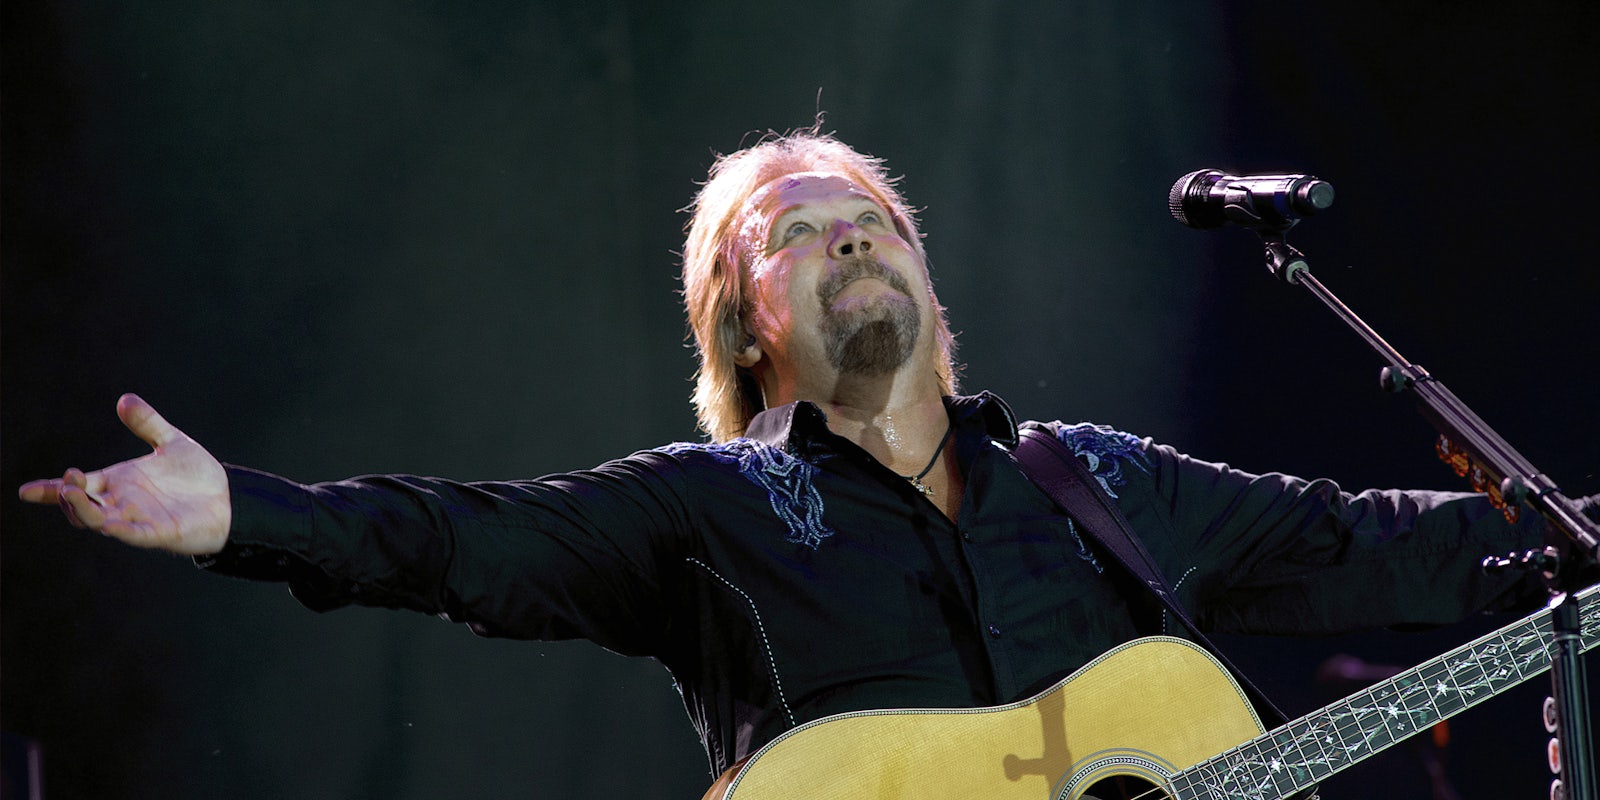 Travis Tritt with arms out with guitar and microphone in front of dark background